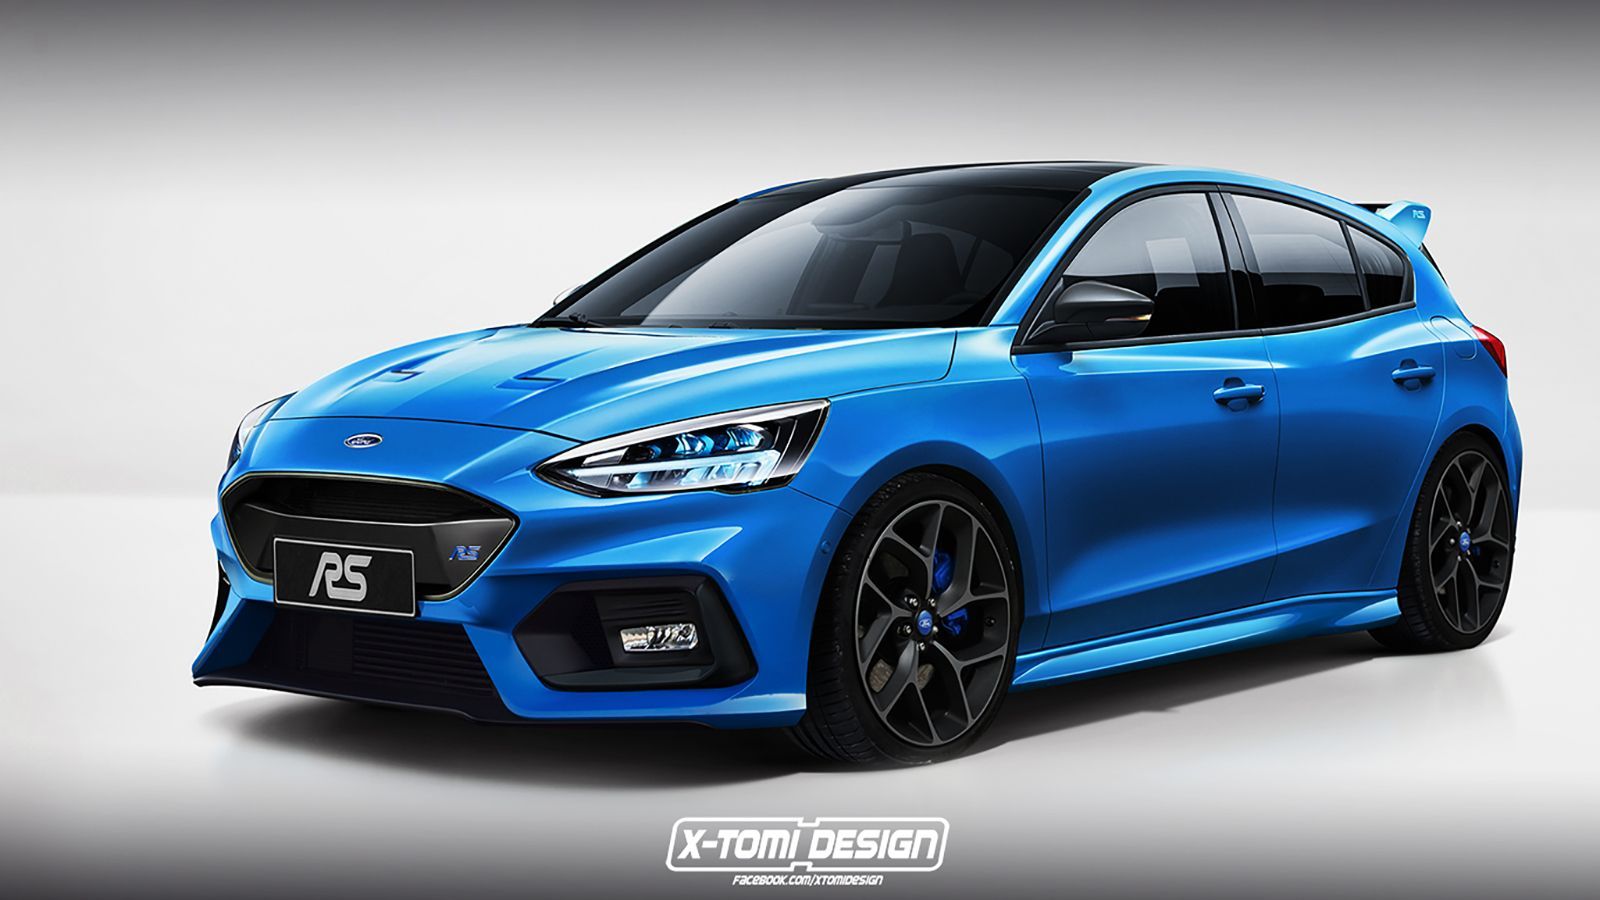 Here's A Preview Of What The Ford Focus ST And Focus RS Might Look Like Top Speed. Ford focus rs, Ford focus, Ford focus st